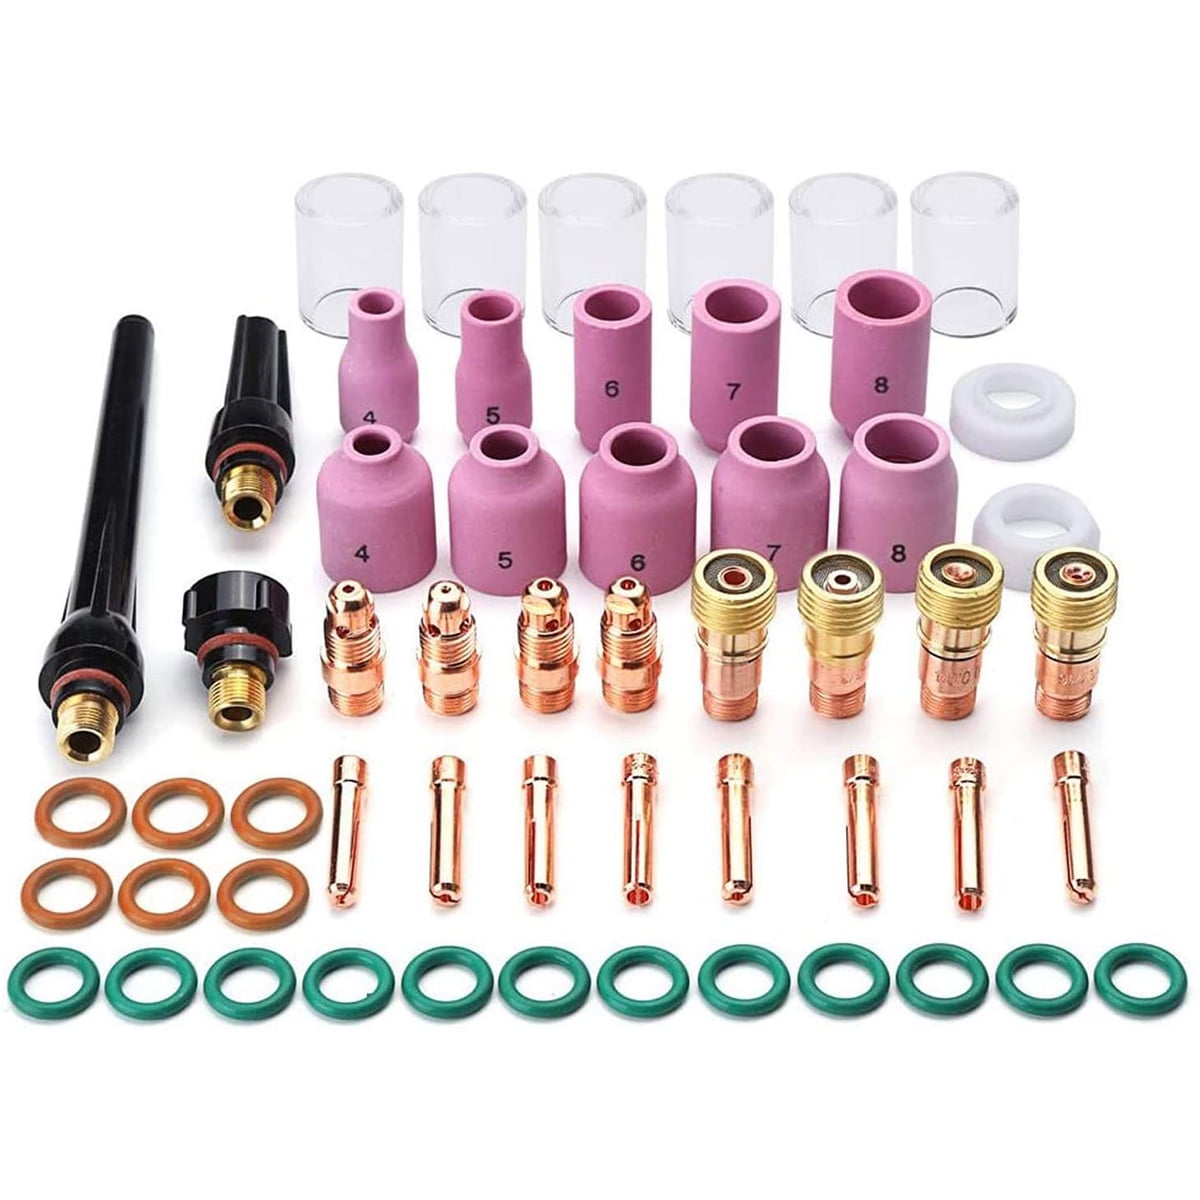 IXTIX 55pcs TIG Welding Torch Accessories Kit with High Temperature Glass Cup Back Collets Collets Body Alumina Nozzle Stubby Gas Lens TIG Welding Equipment - Walmart.com